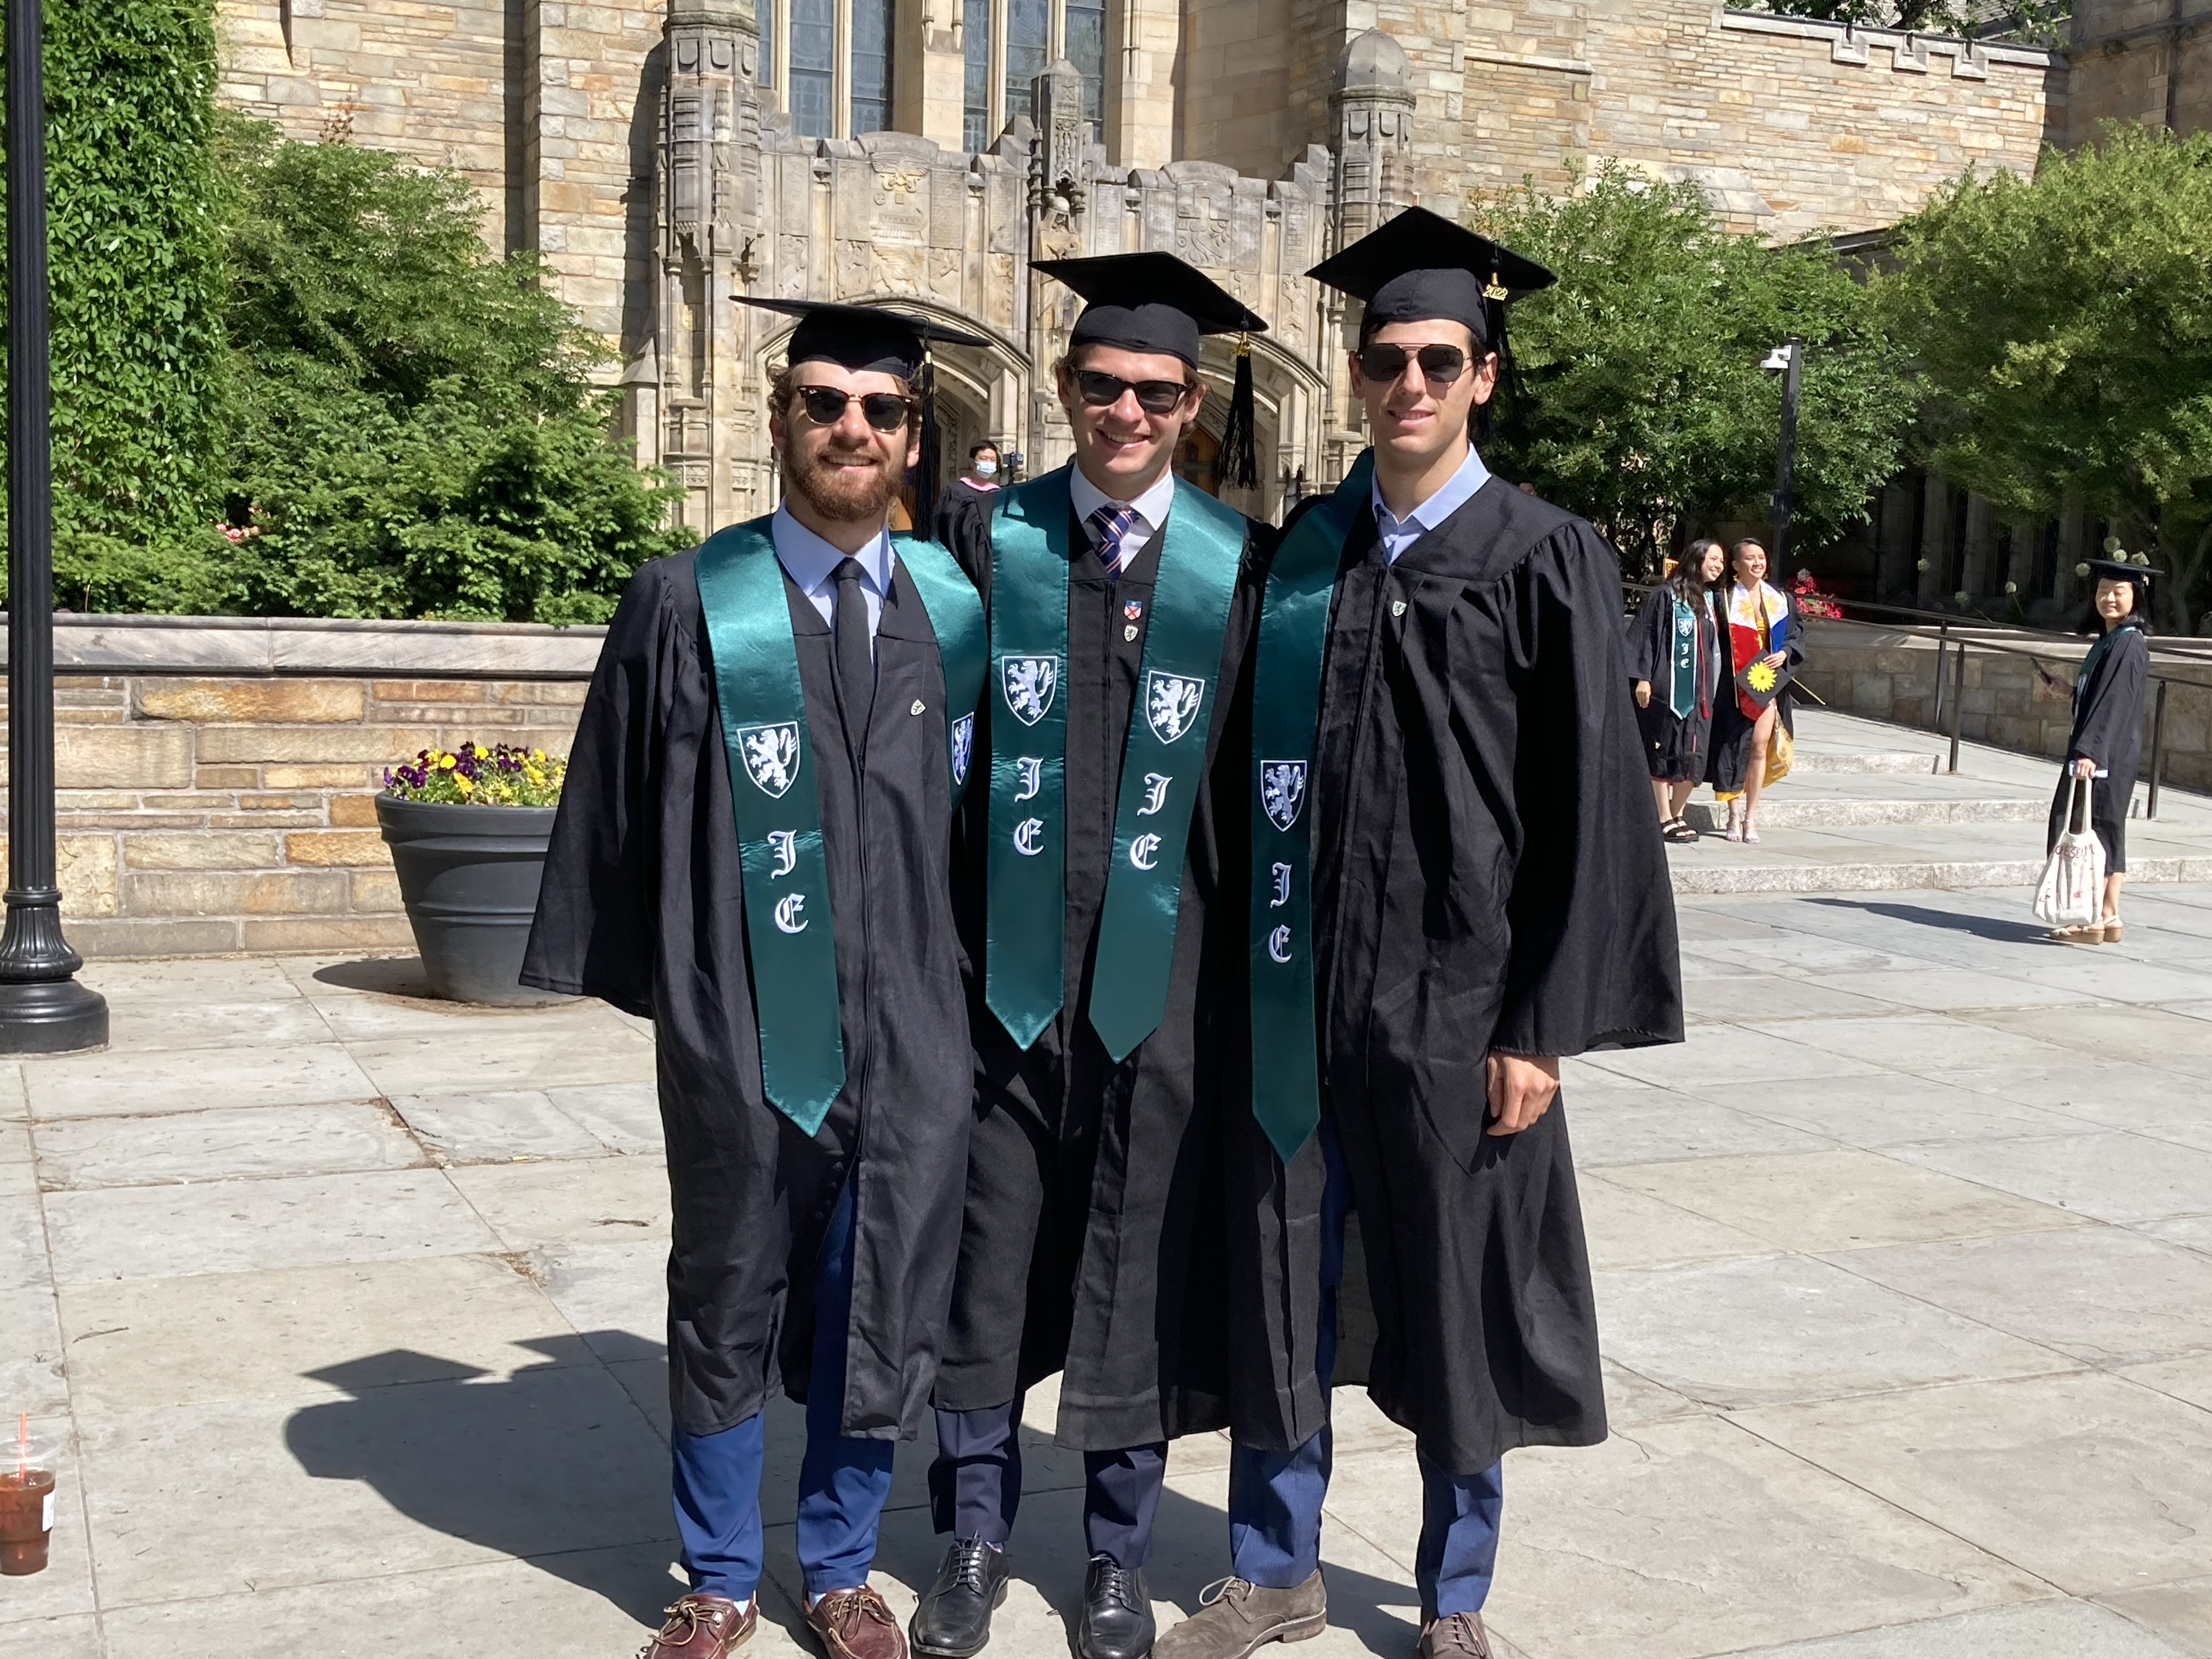 Three male graduates wearing caps, gowns, and sunglasses with green stoles with lion insignia for Jonathan Edwards College